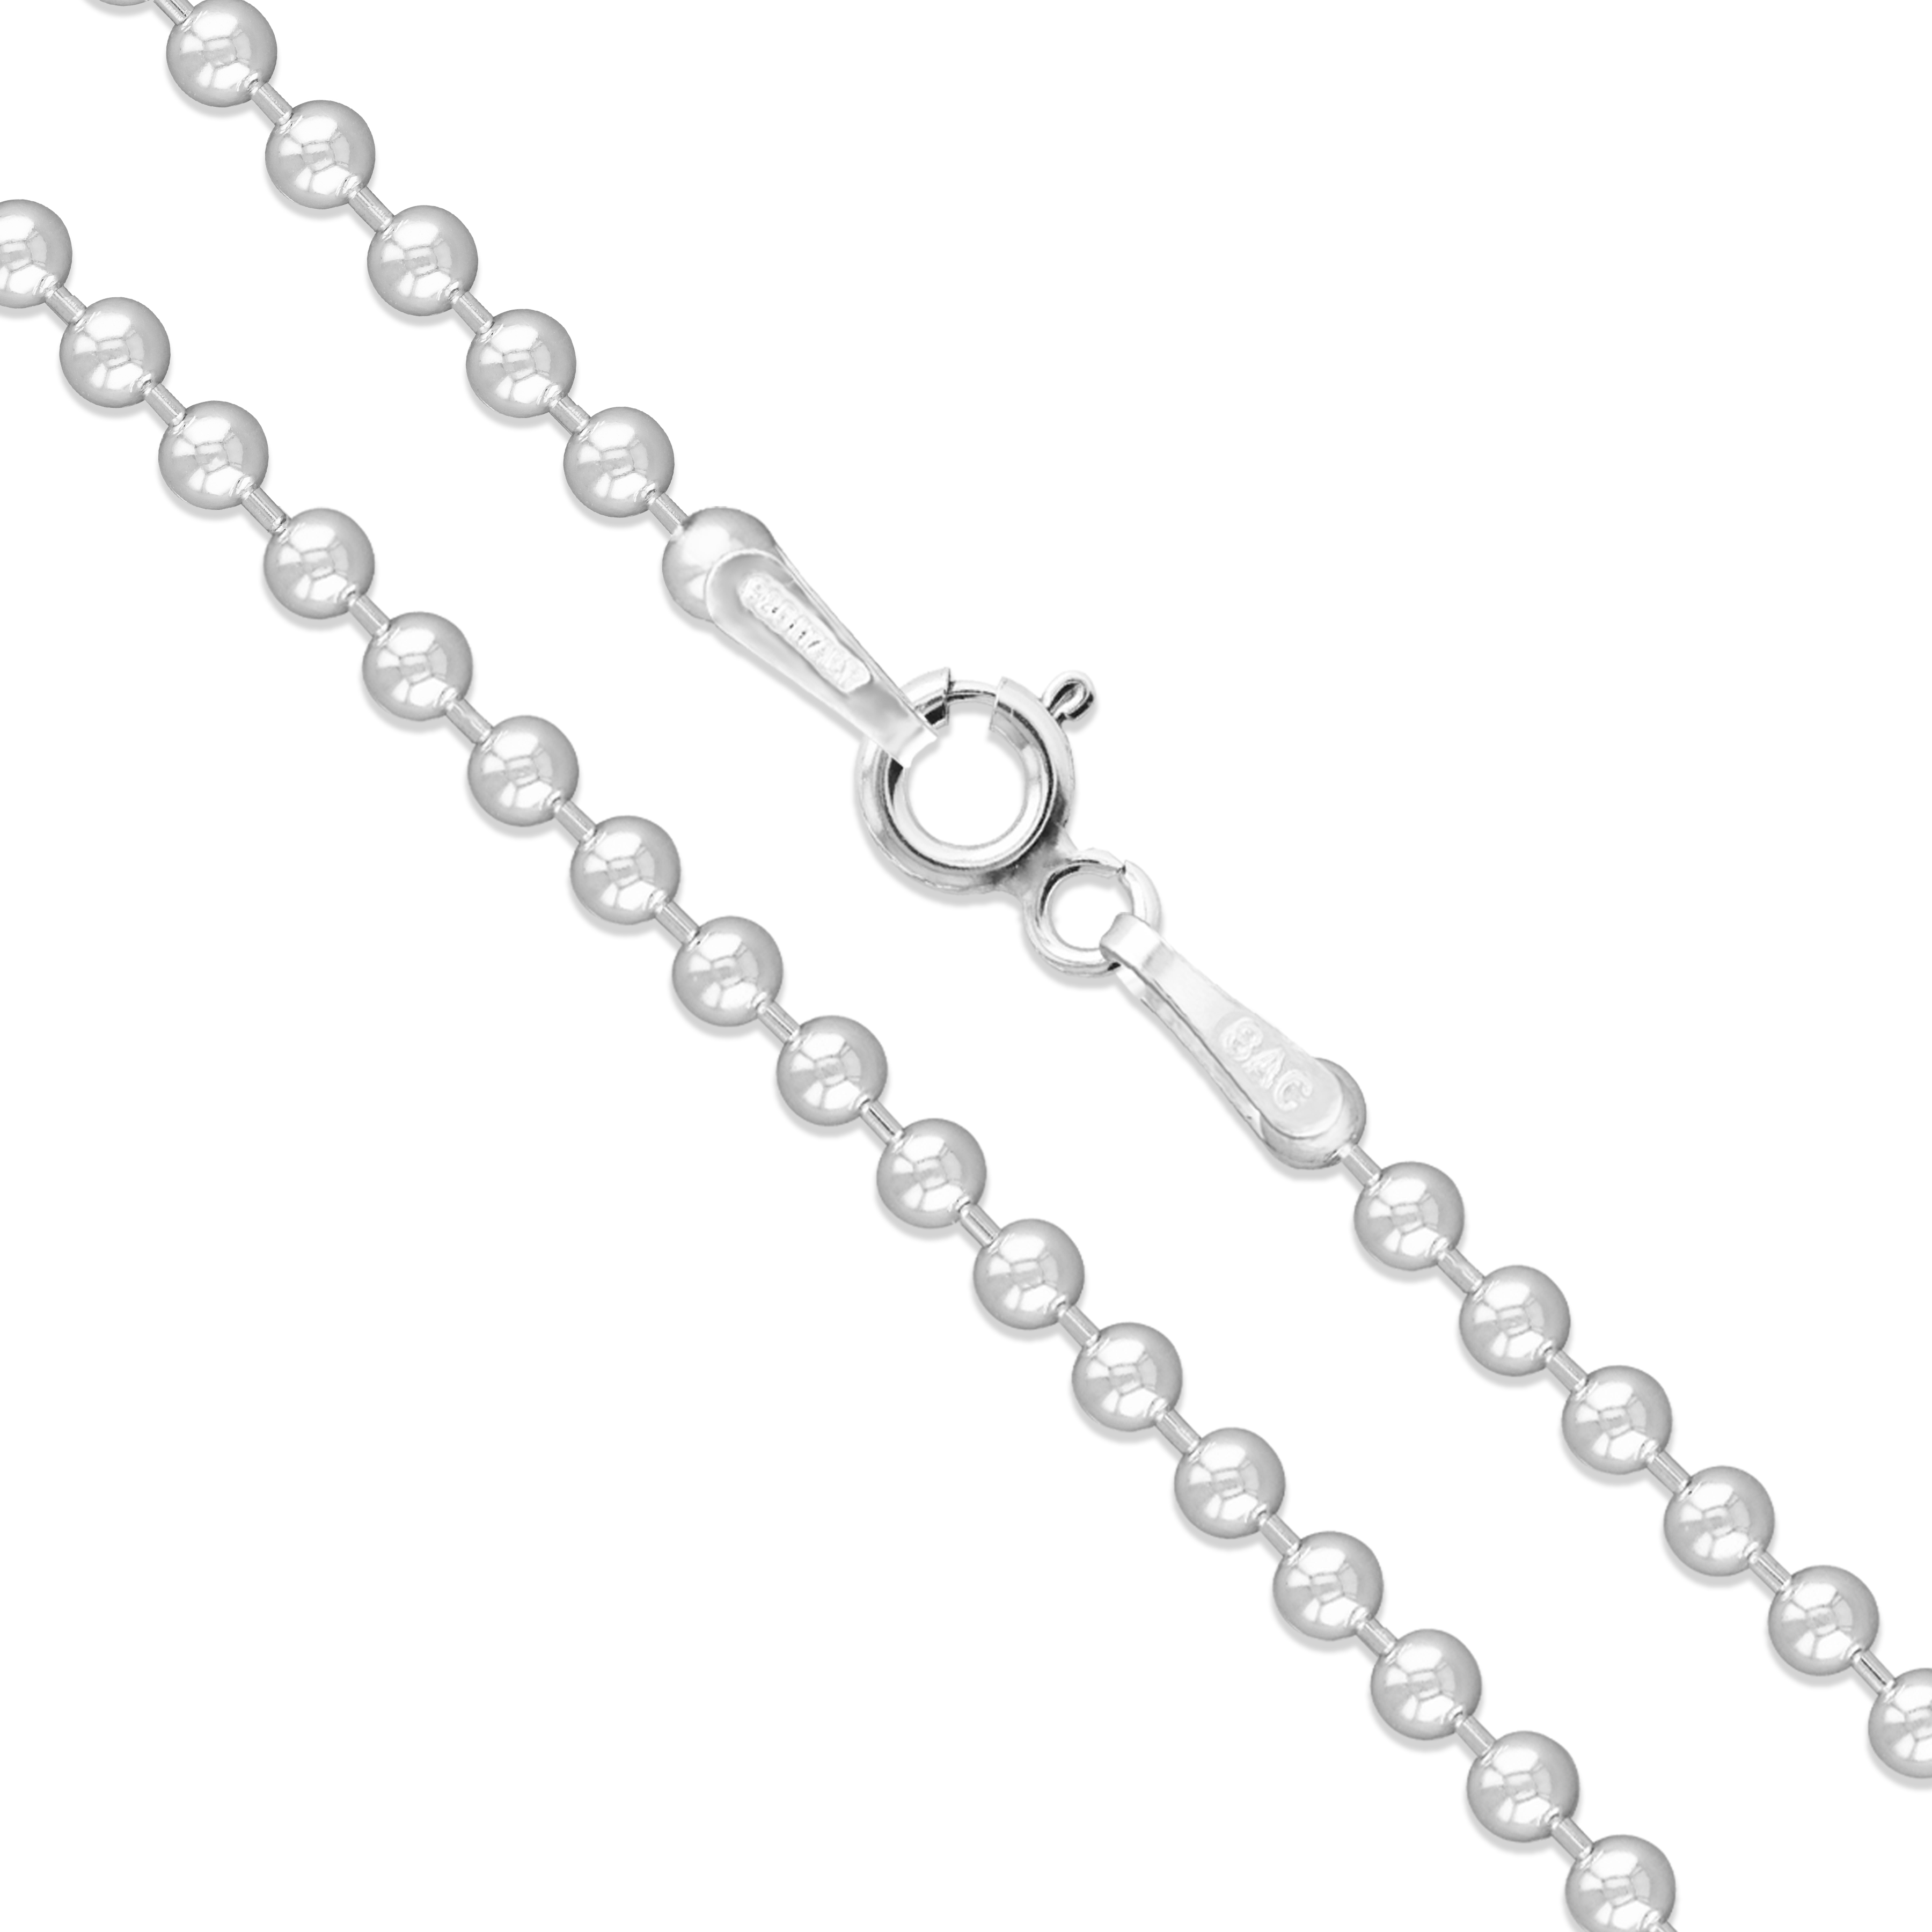 925 Sterling Silver Bead Ball Chain Necklace 16 to 40" inch Various Thicknesses 